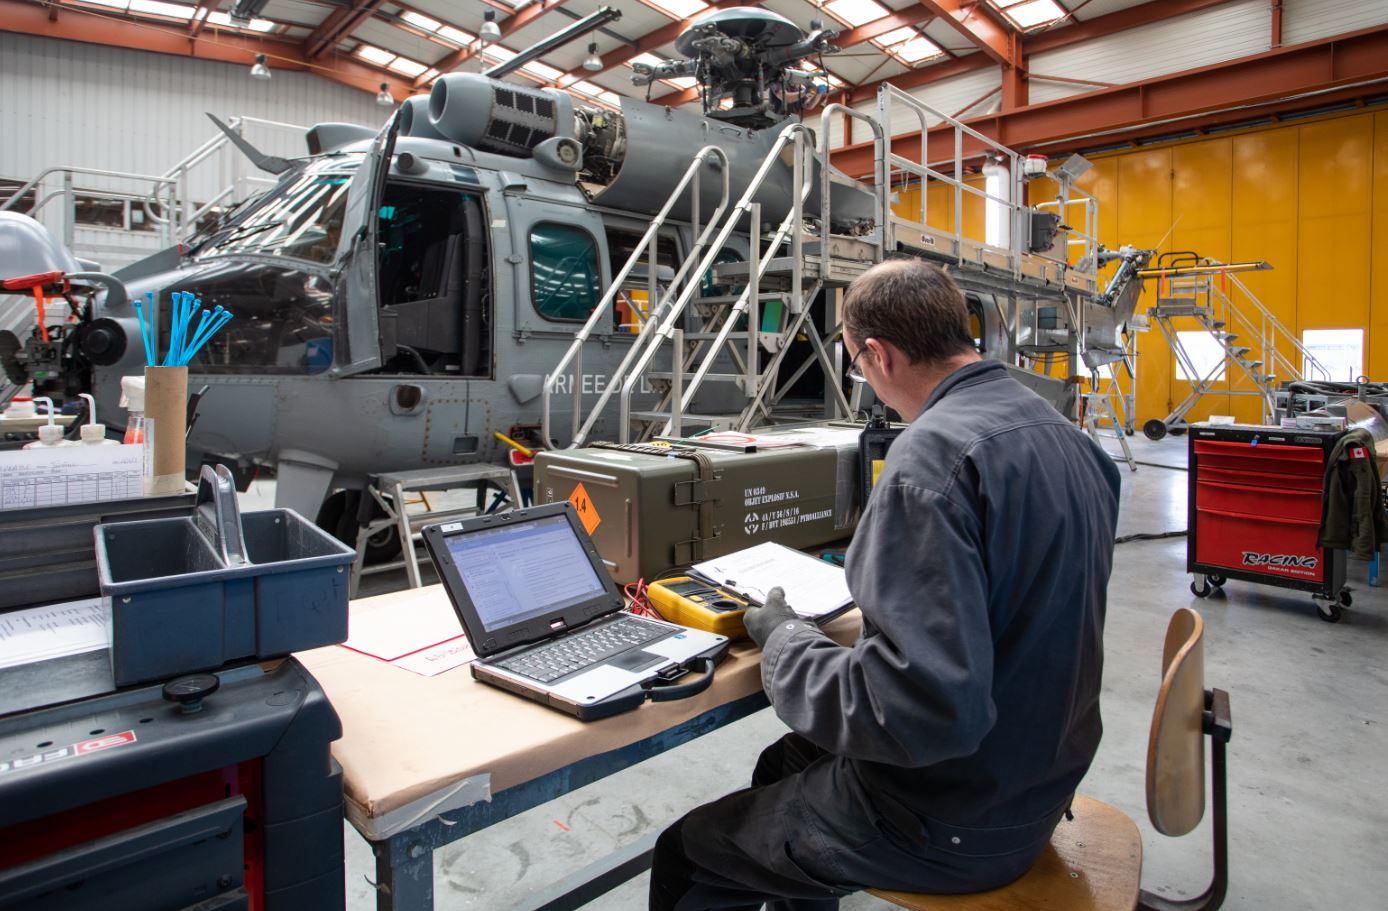 HELI-UNION PERFORMS THE FIRST EVER H725 CARACAL (H225M) MAJOR OVERHAUL